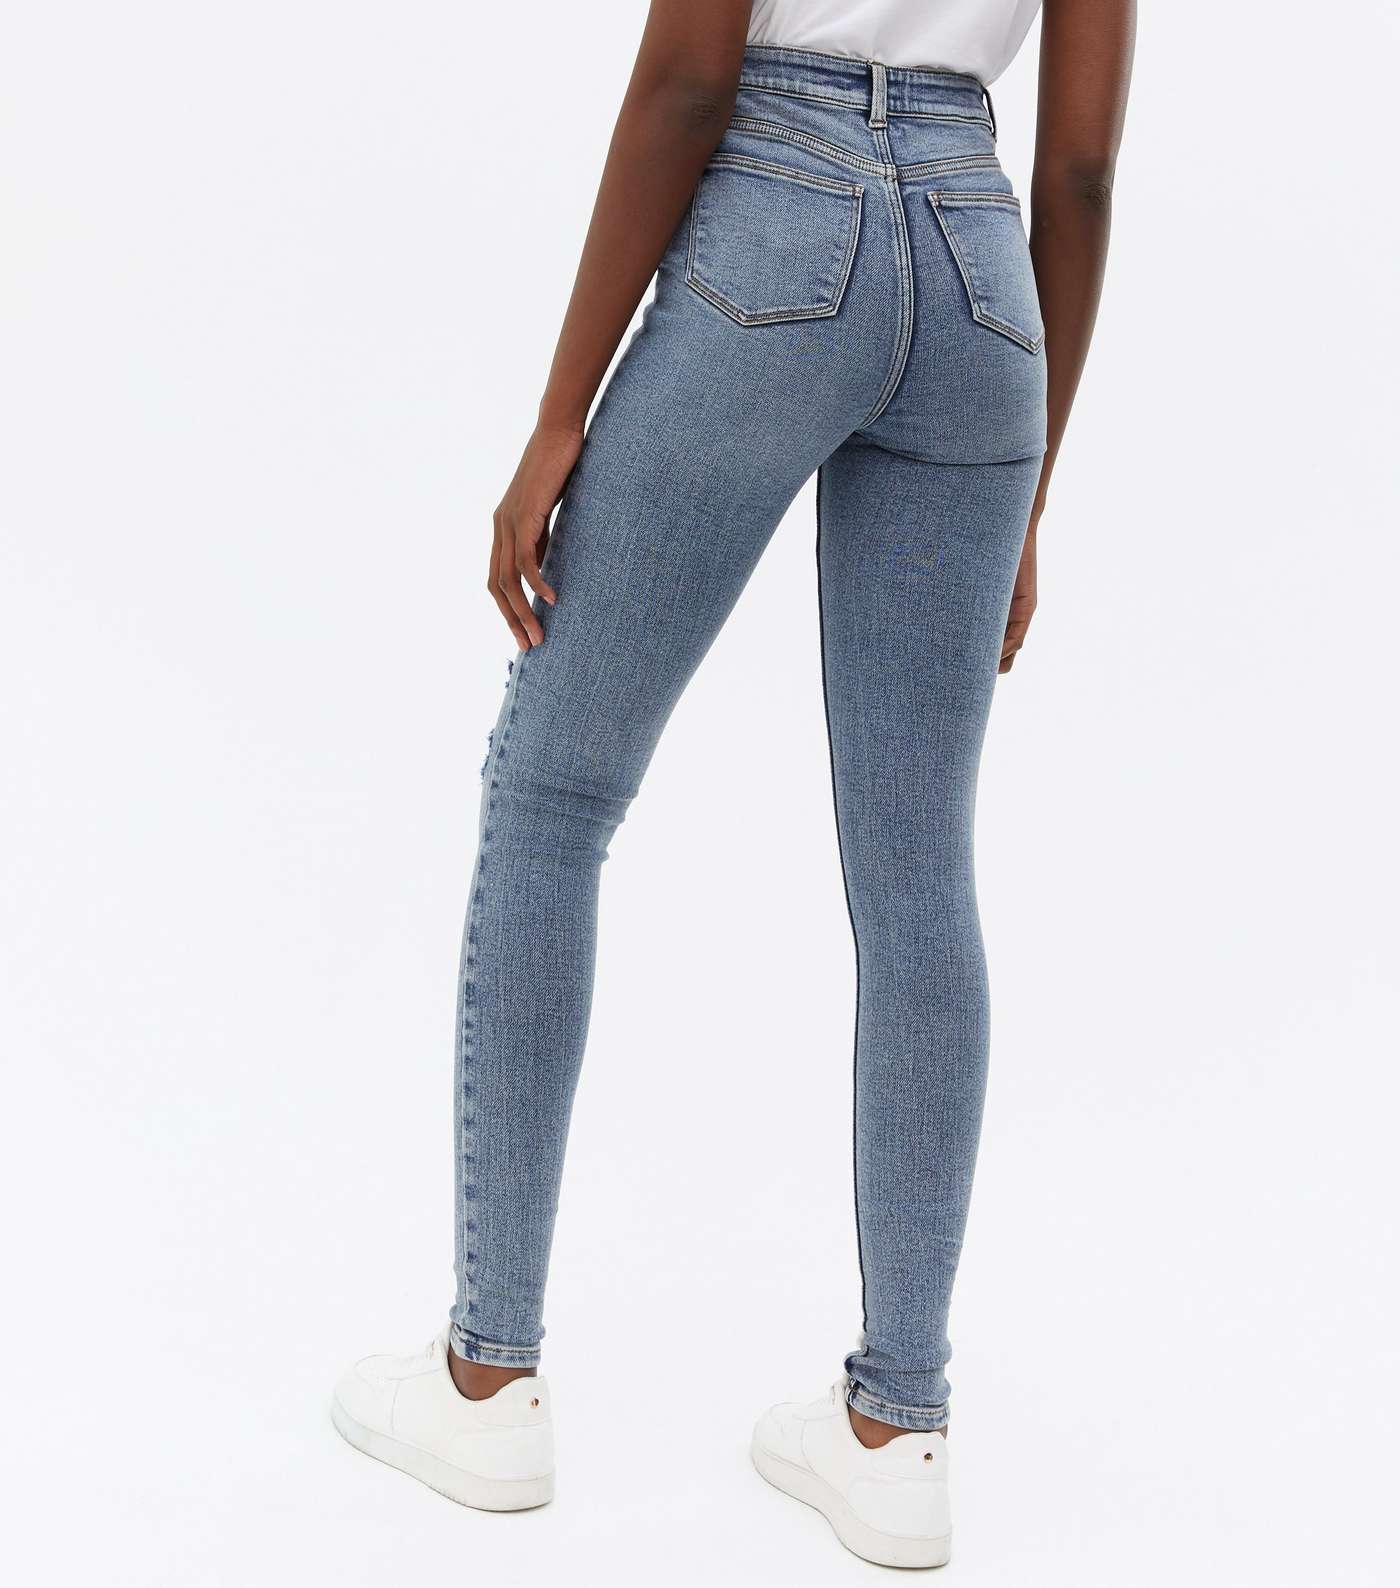 Tall Teal Ripped High Waist Hallie Super Skinny Jeans Image 4